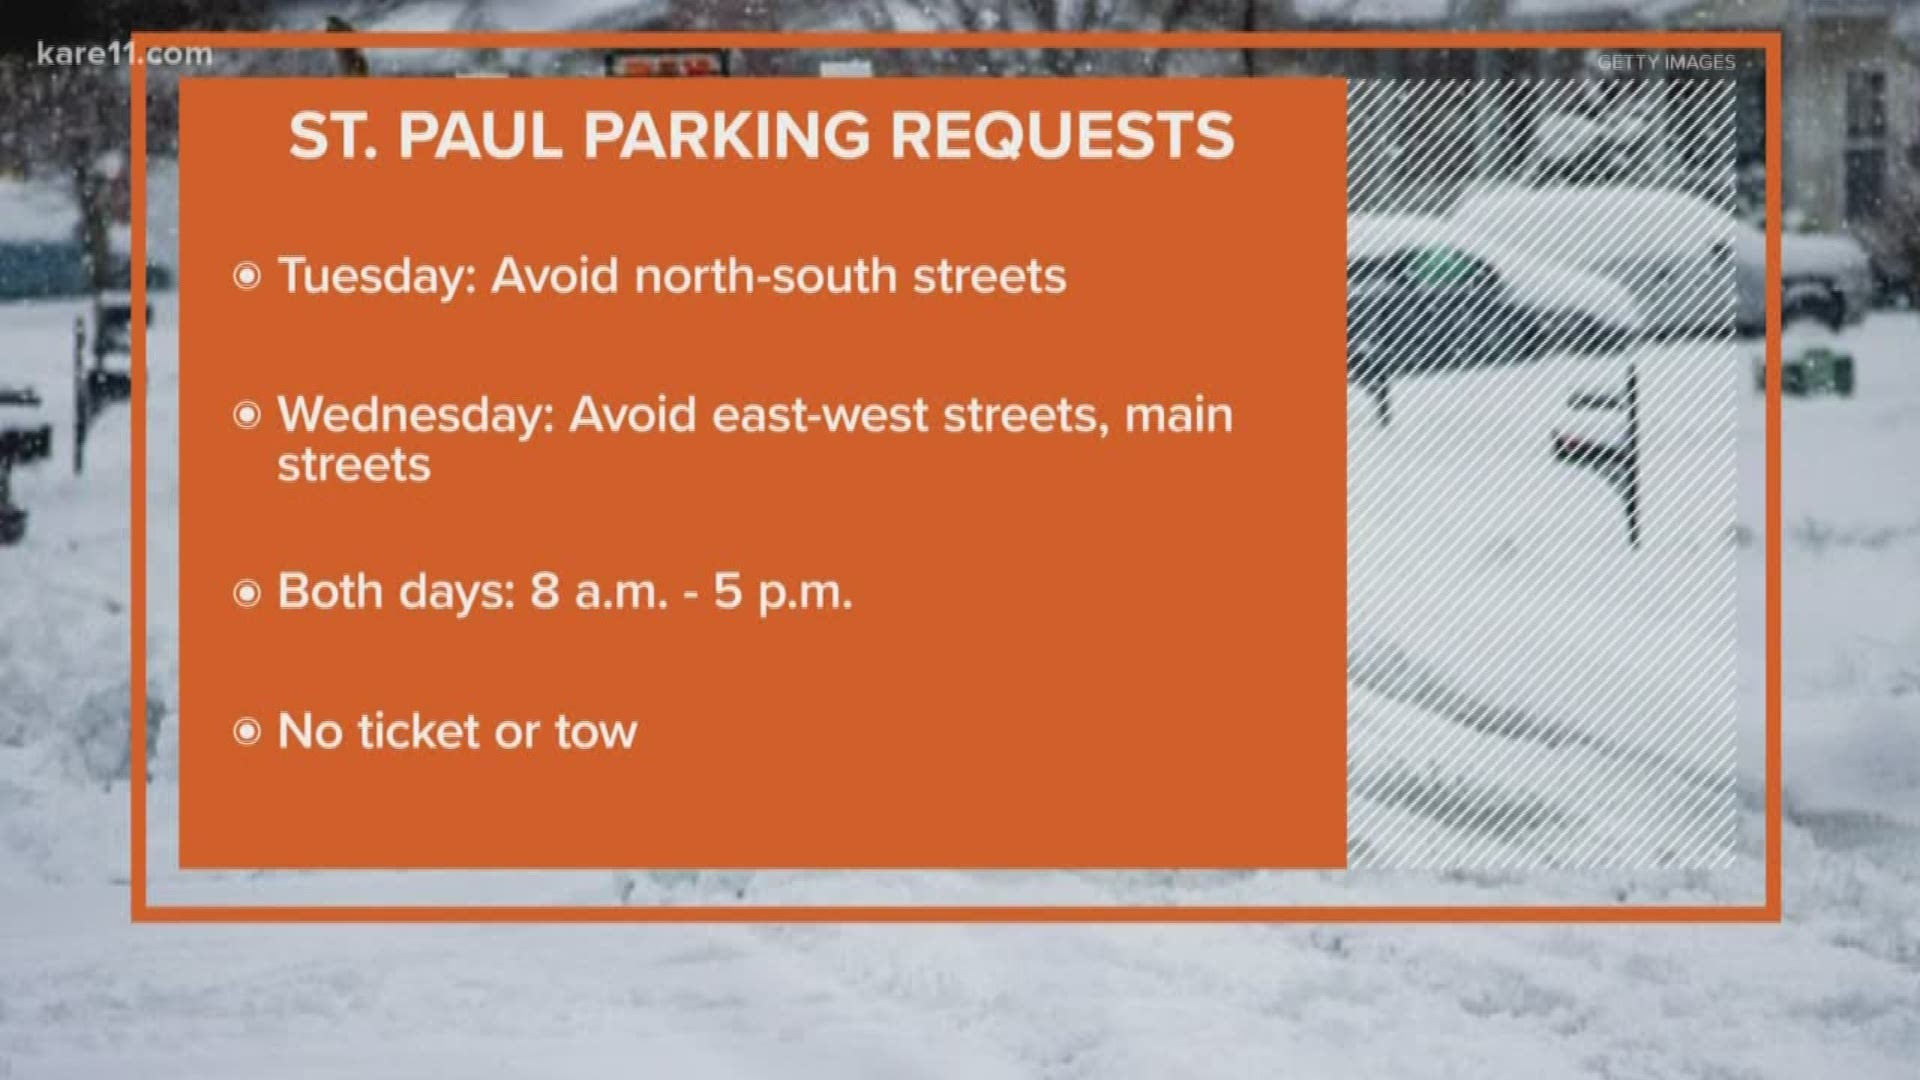 The plowing work is not part of a snow emergency.